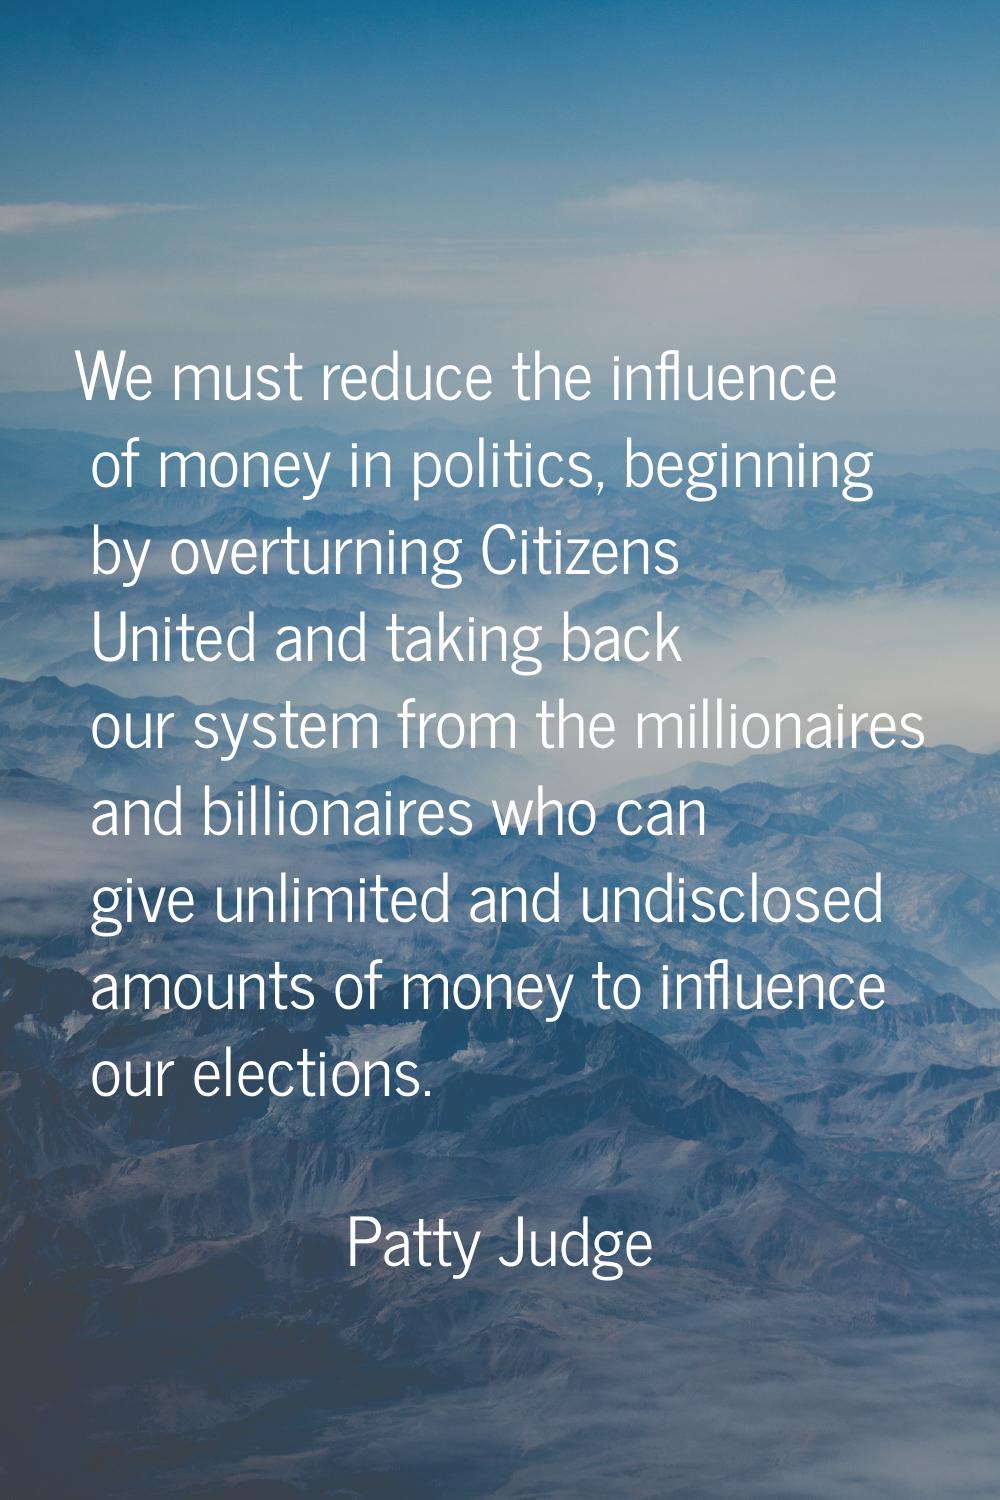 We must reduce the influence of money in politics, beginning by overturning Citizens United and tak